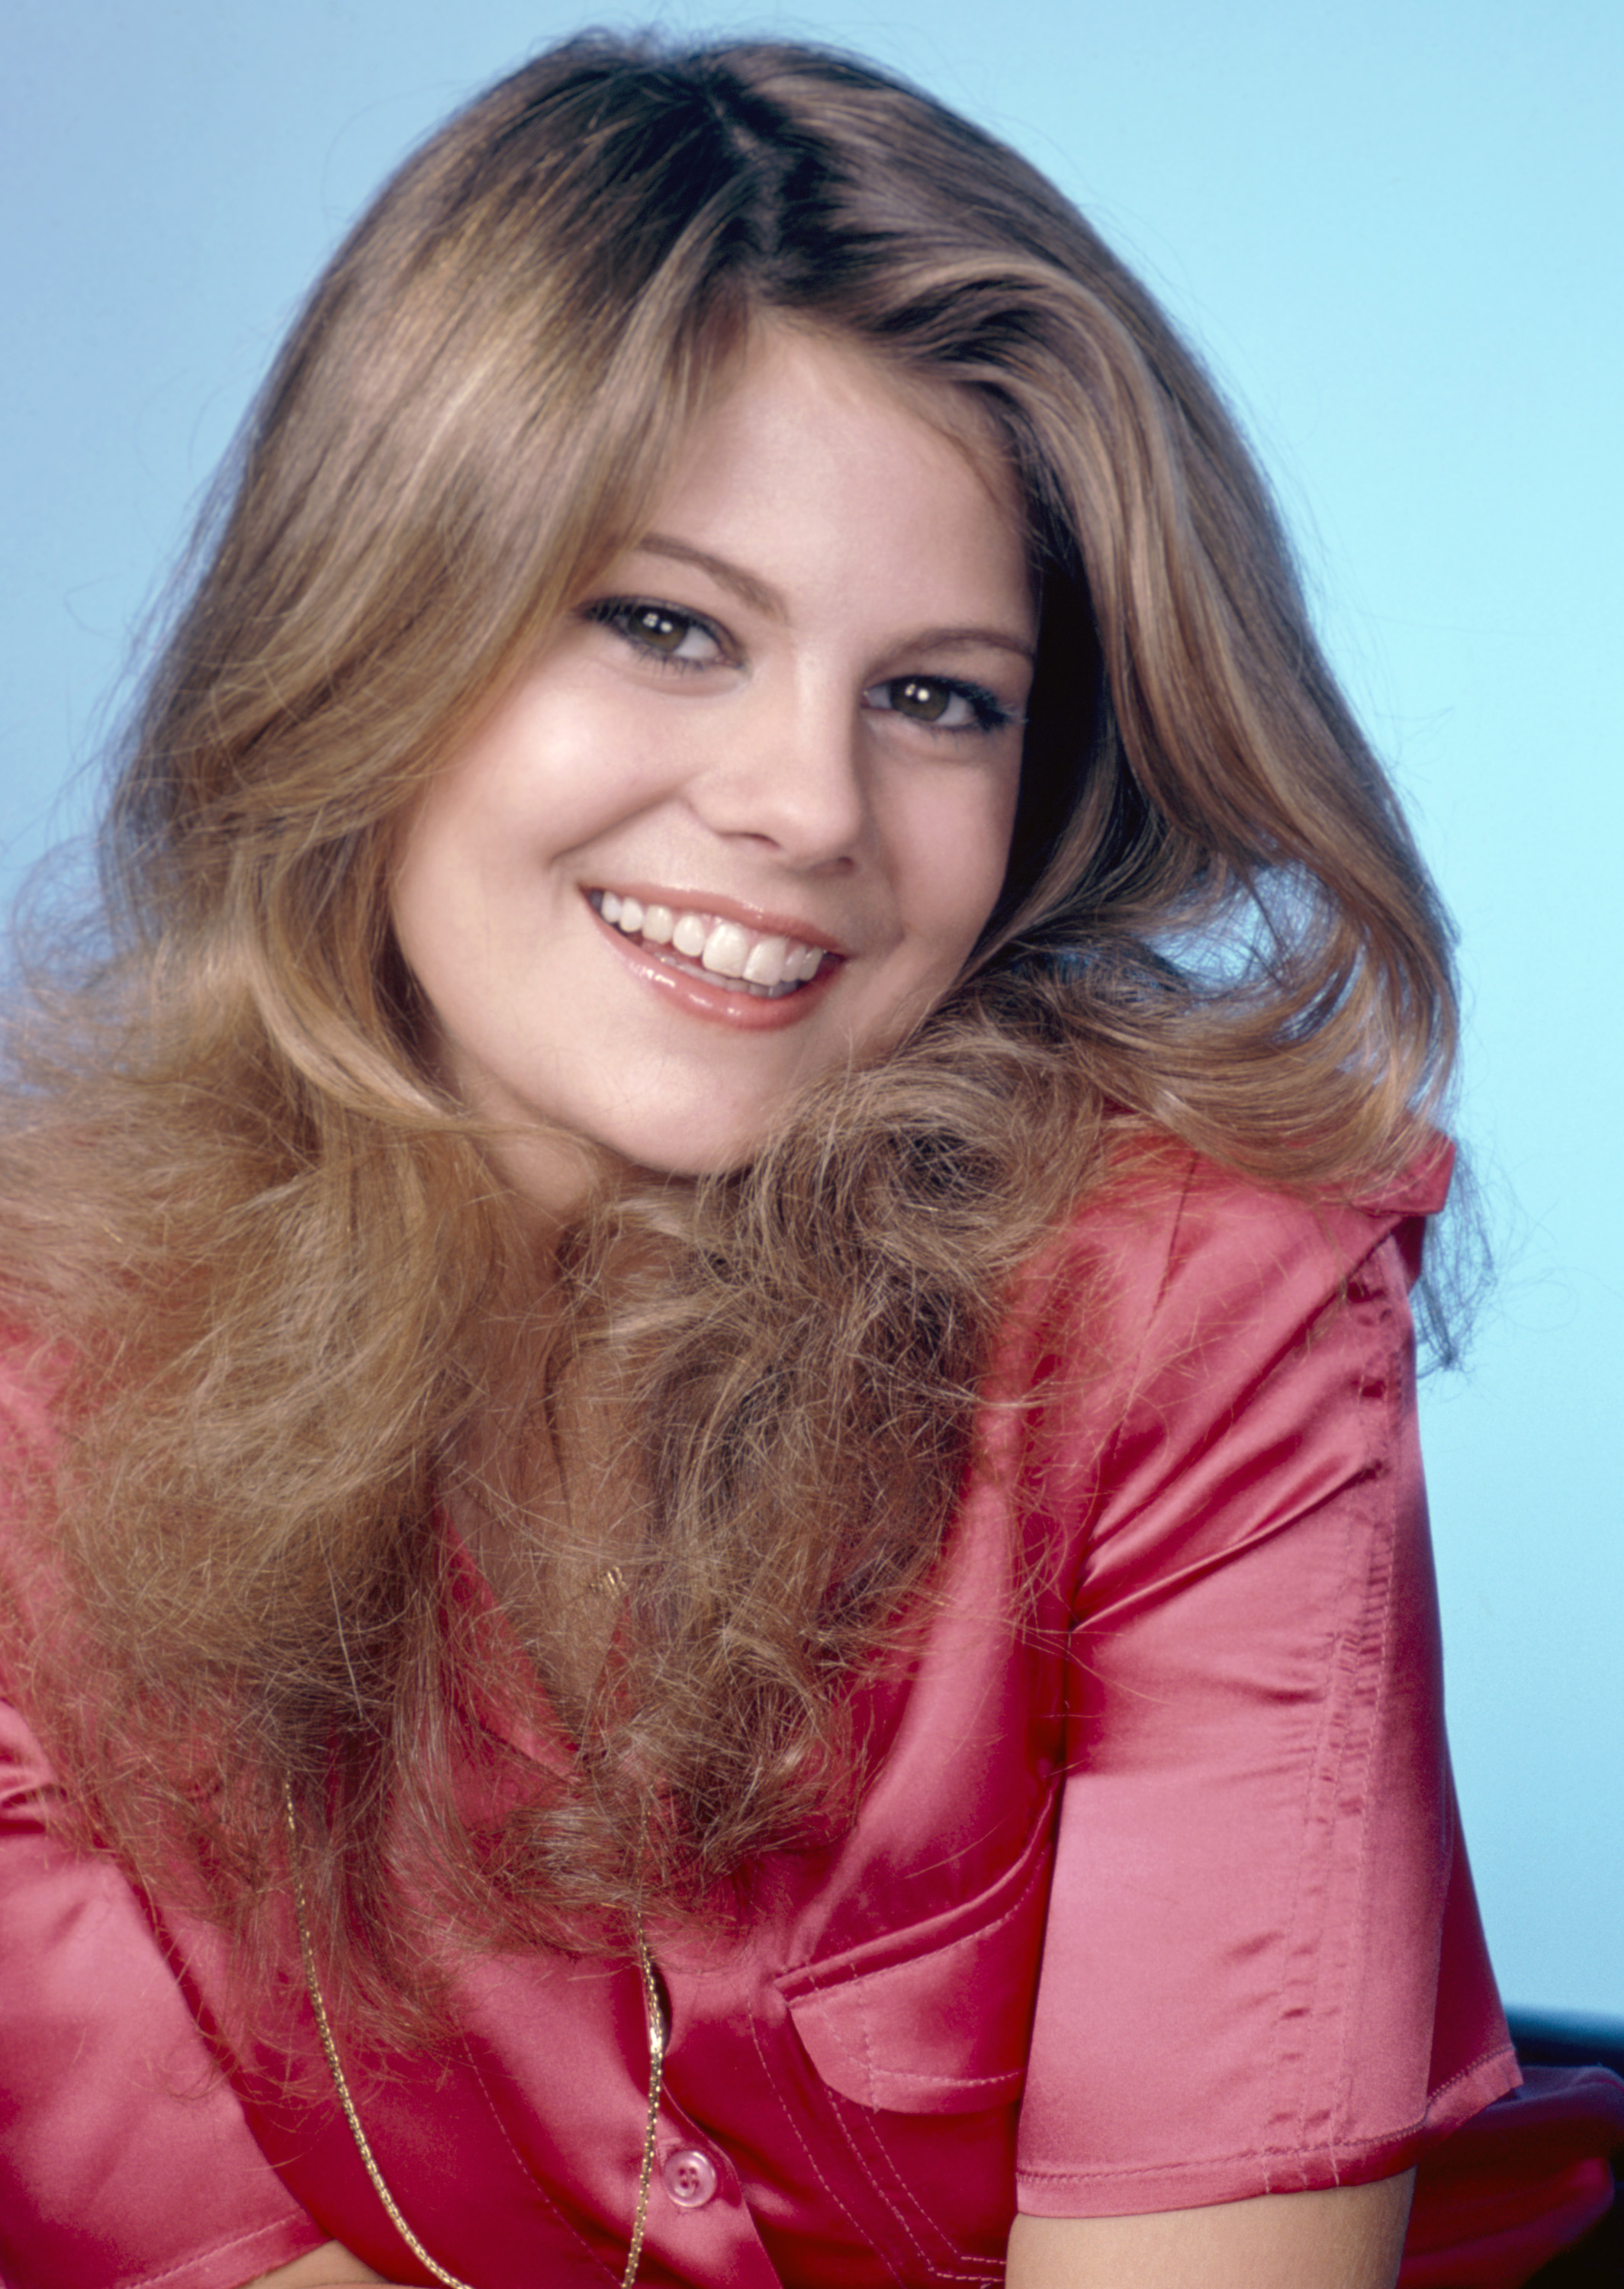 Lisa Whelchel as Blair Warner on "The Facts of Life" circa 1979 | Source: Getty Images